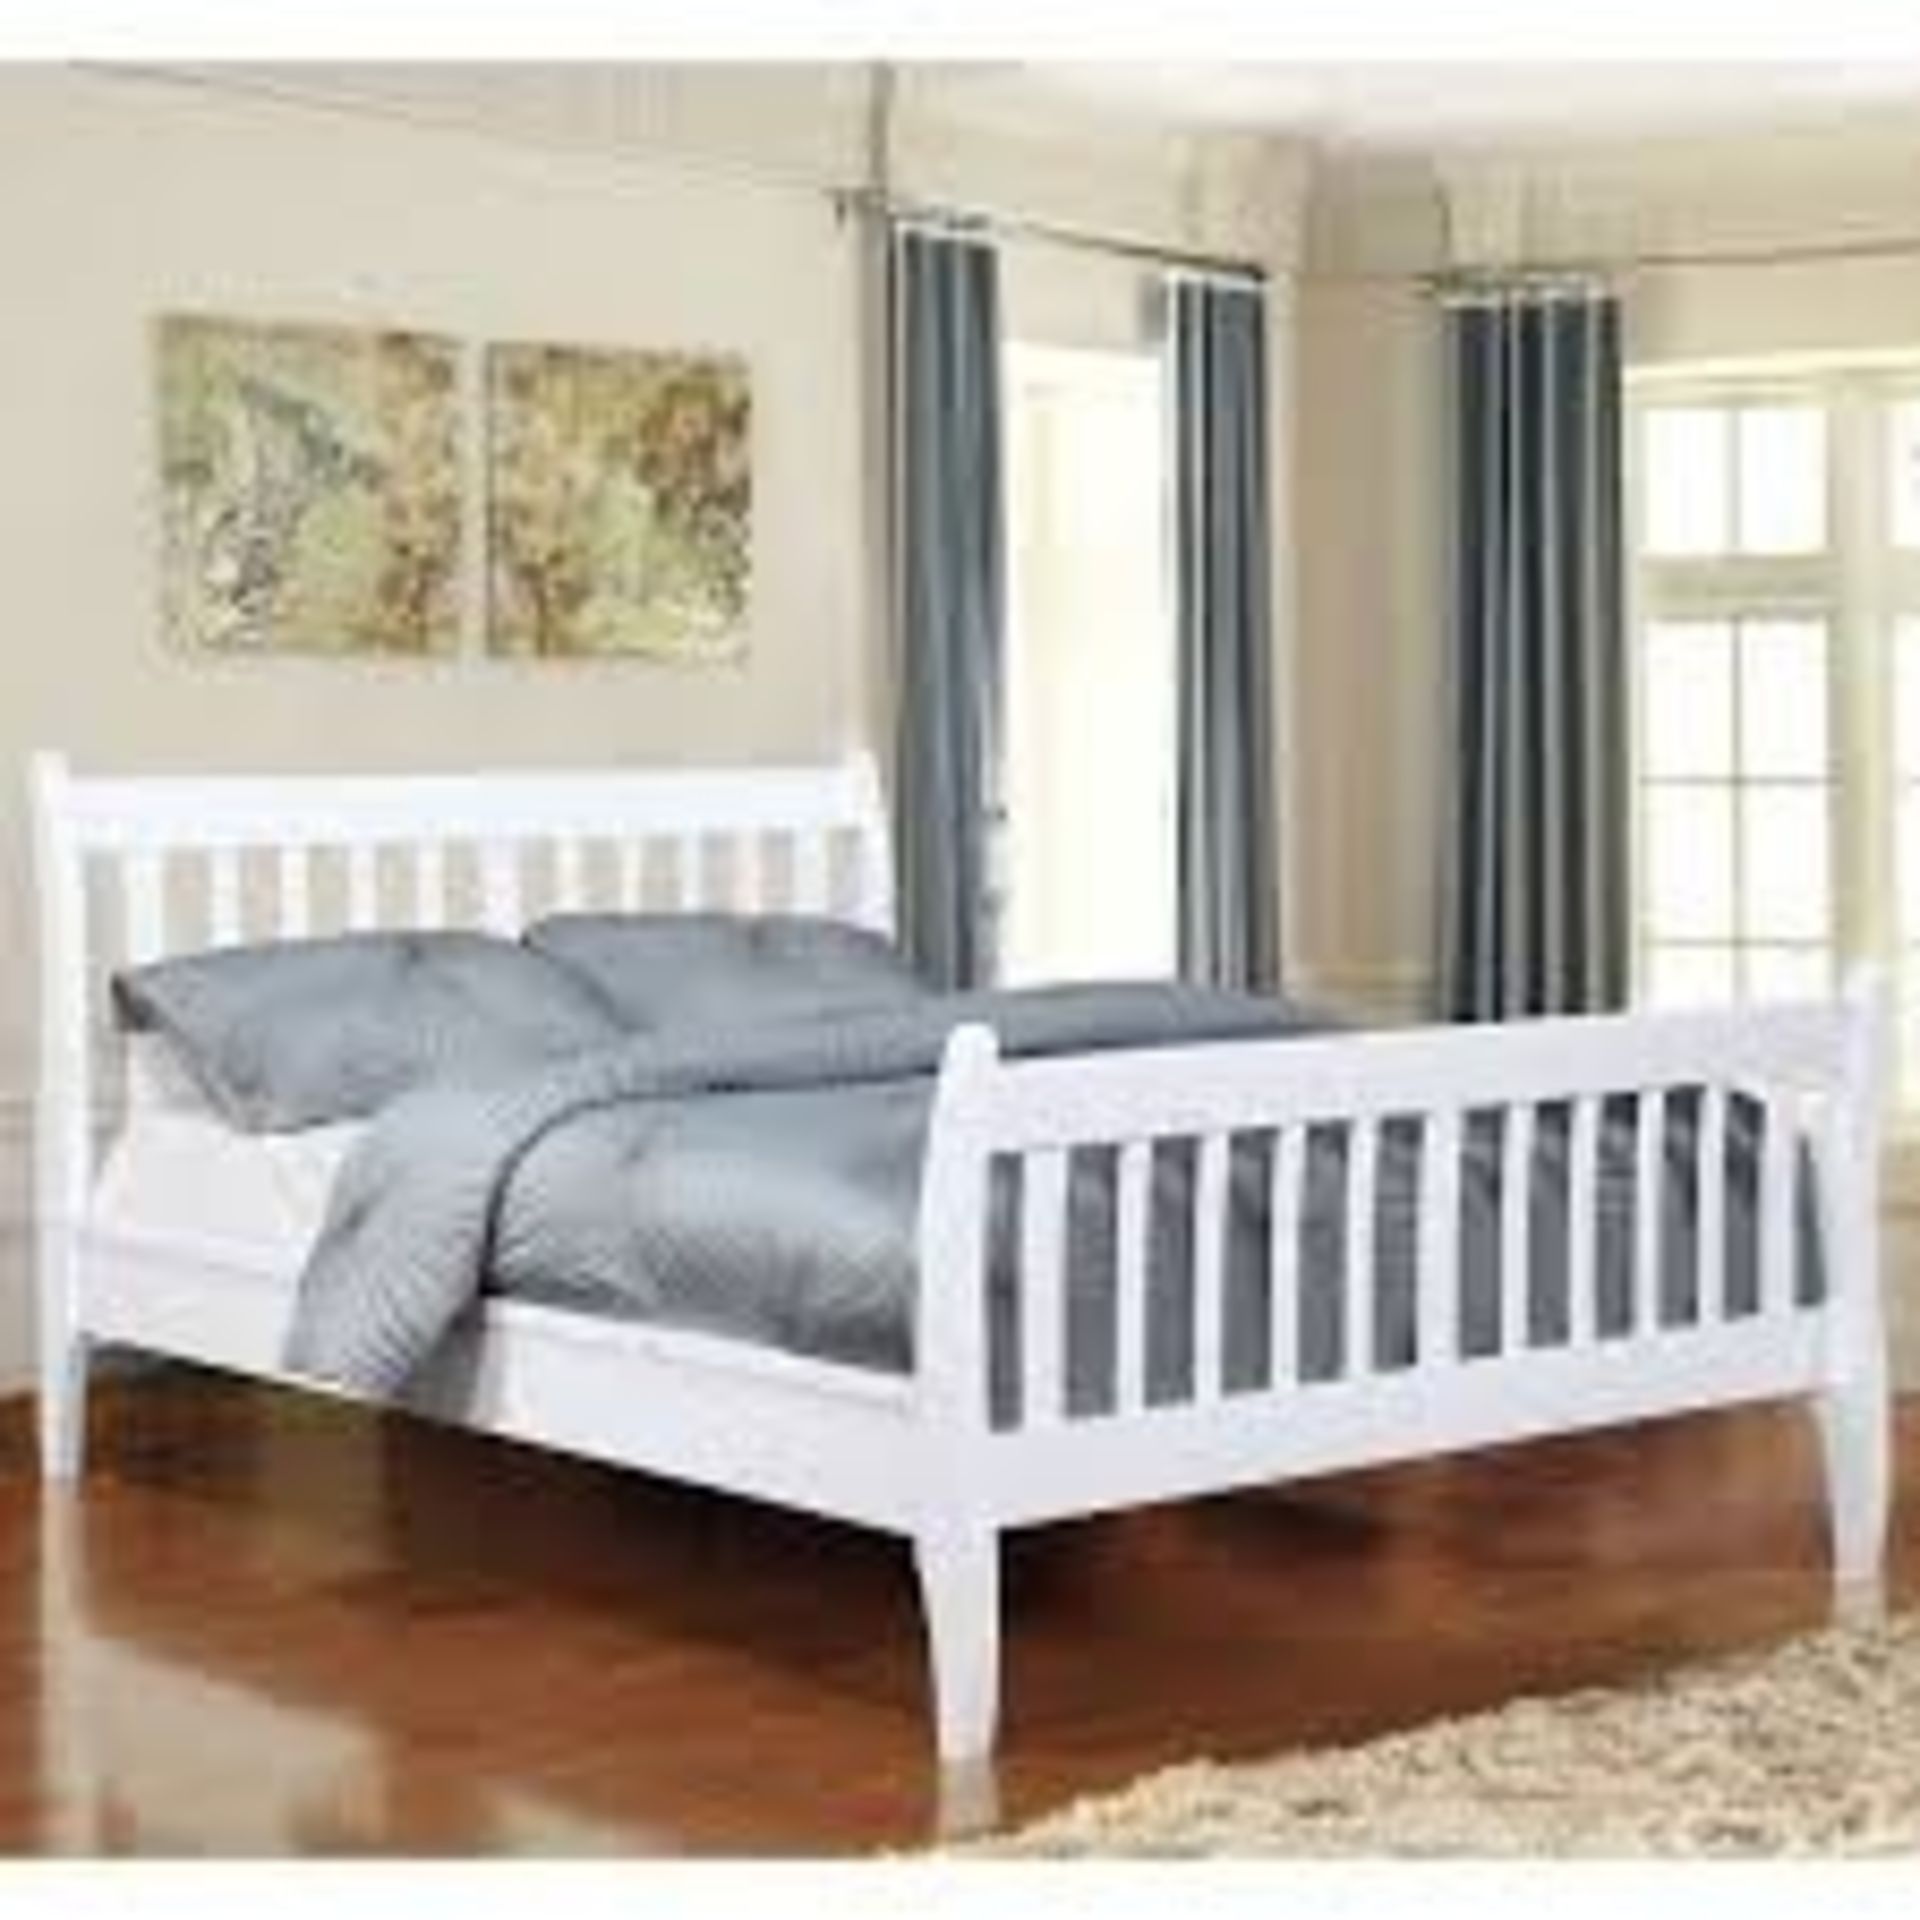 Brand New and Boxed Single Nicolas Bed (White) RRP £199